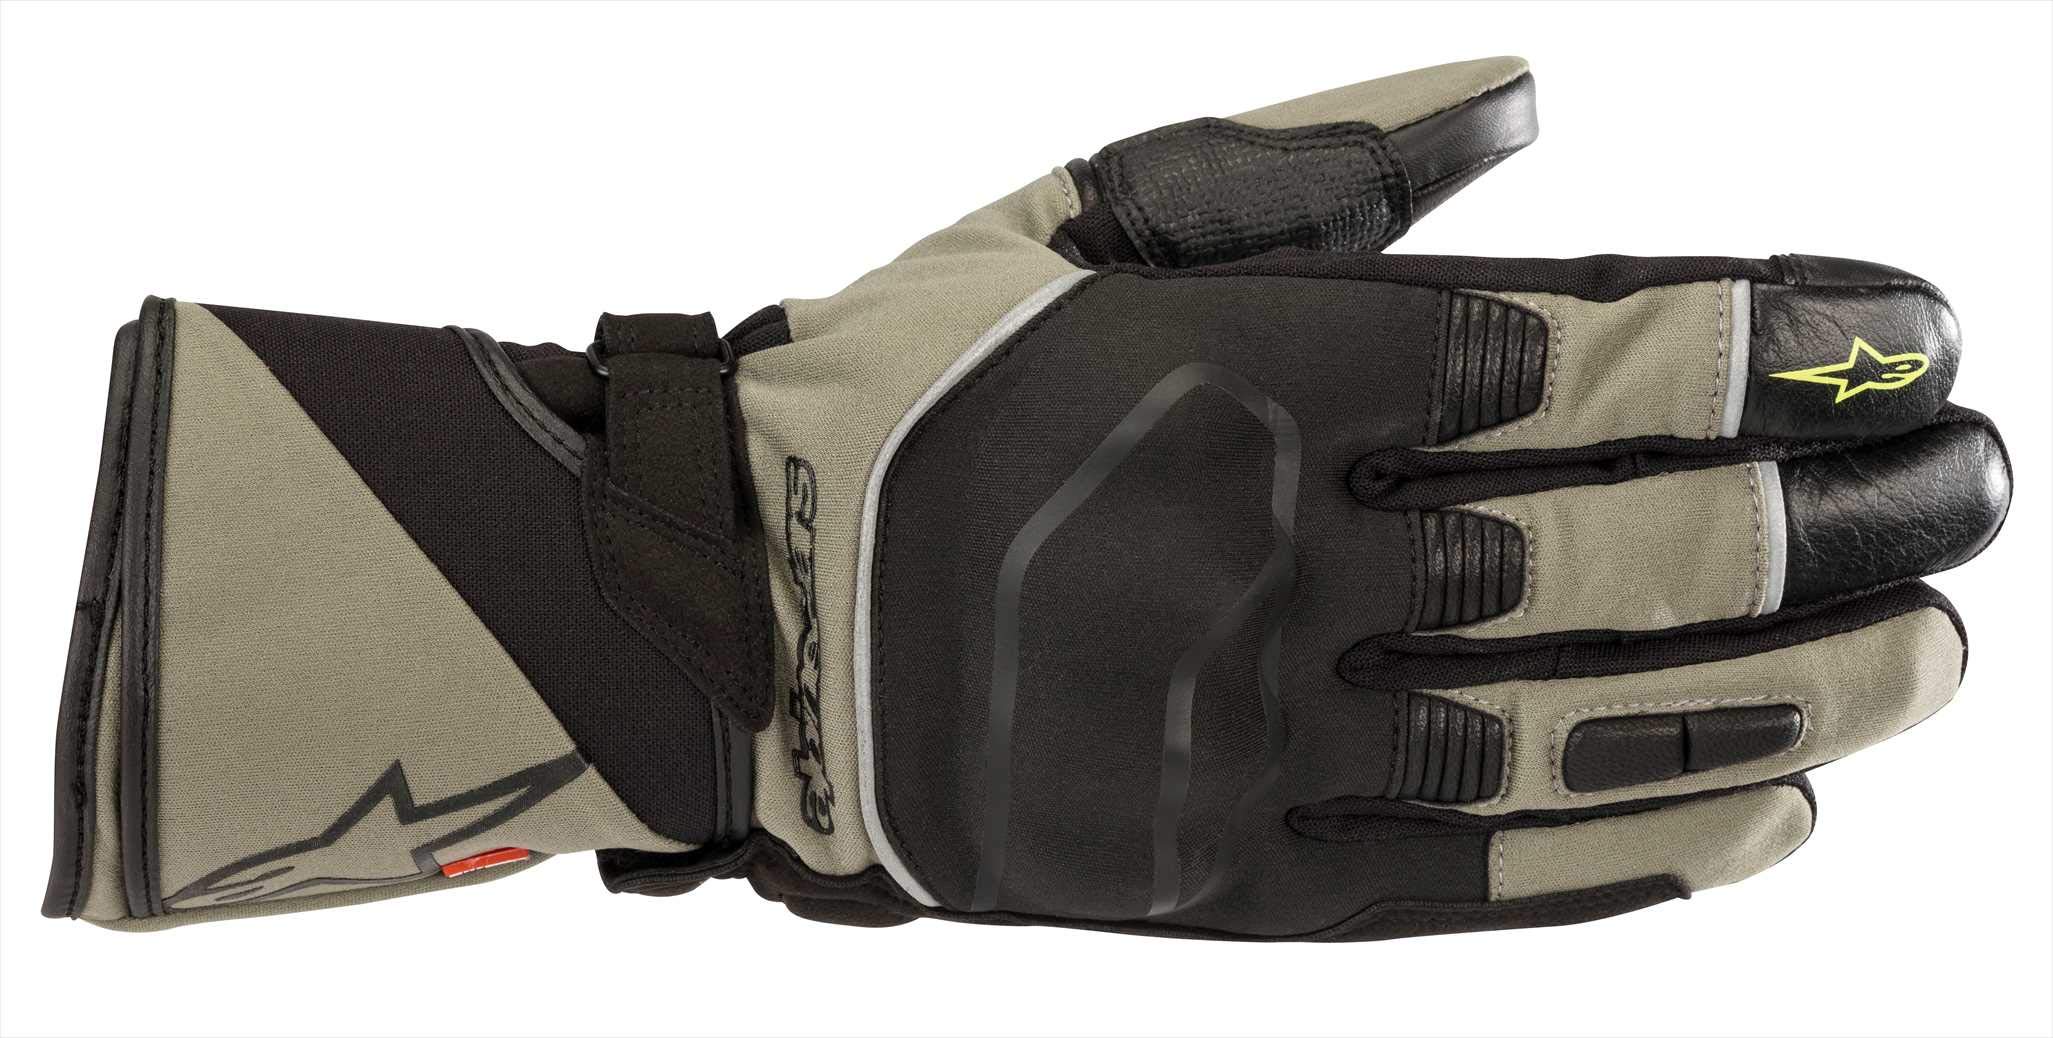 Alpinestars Men's Andes Touring Outdry Waterproof Motorcycle Riding Glove, Military Green/Black, Large